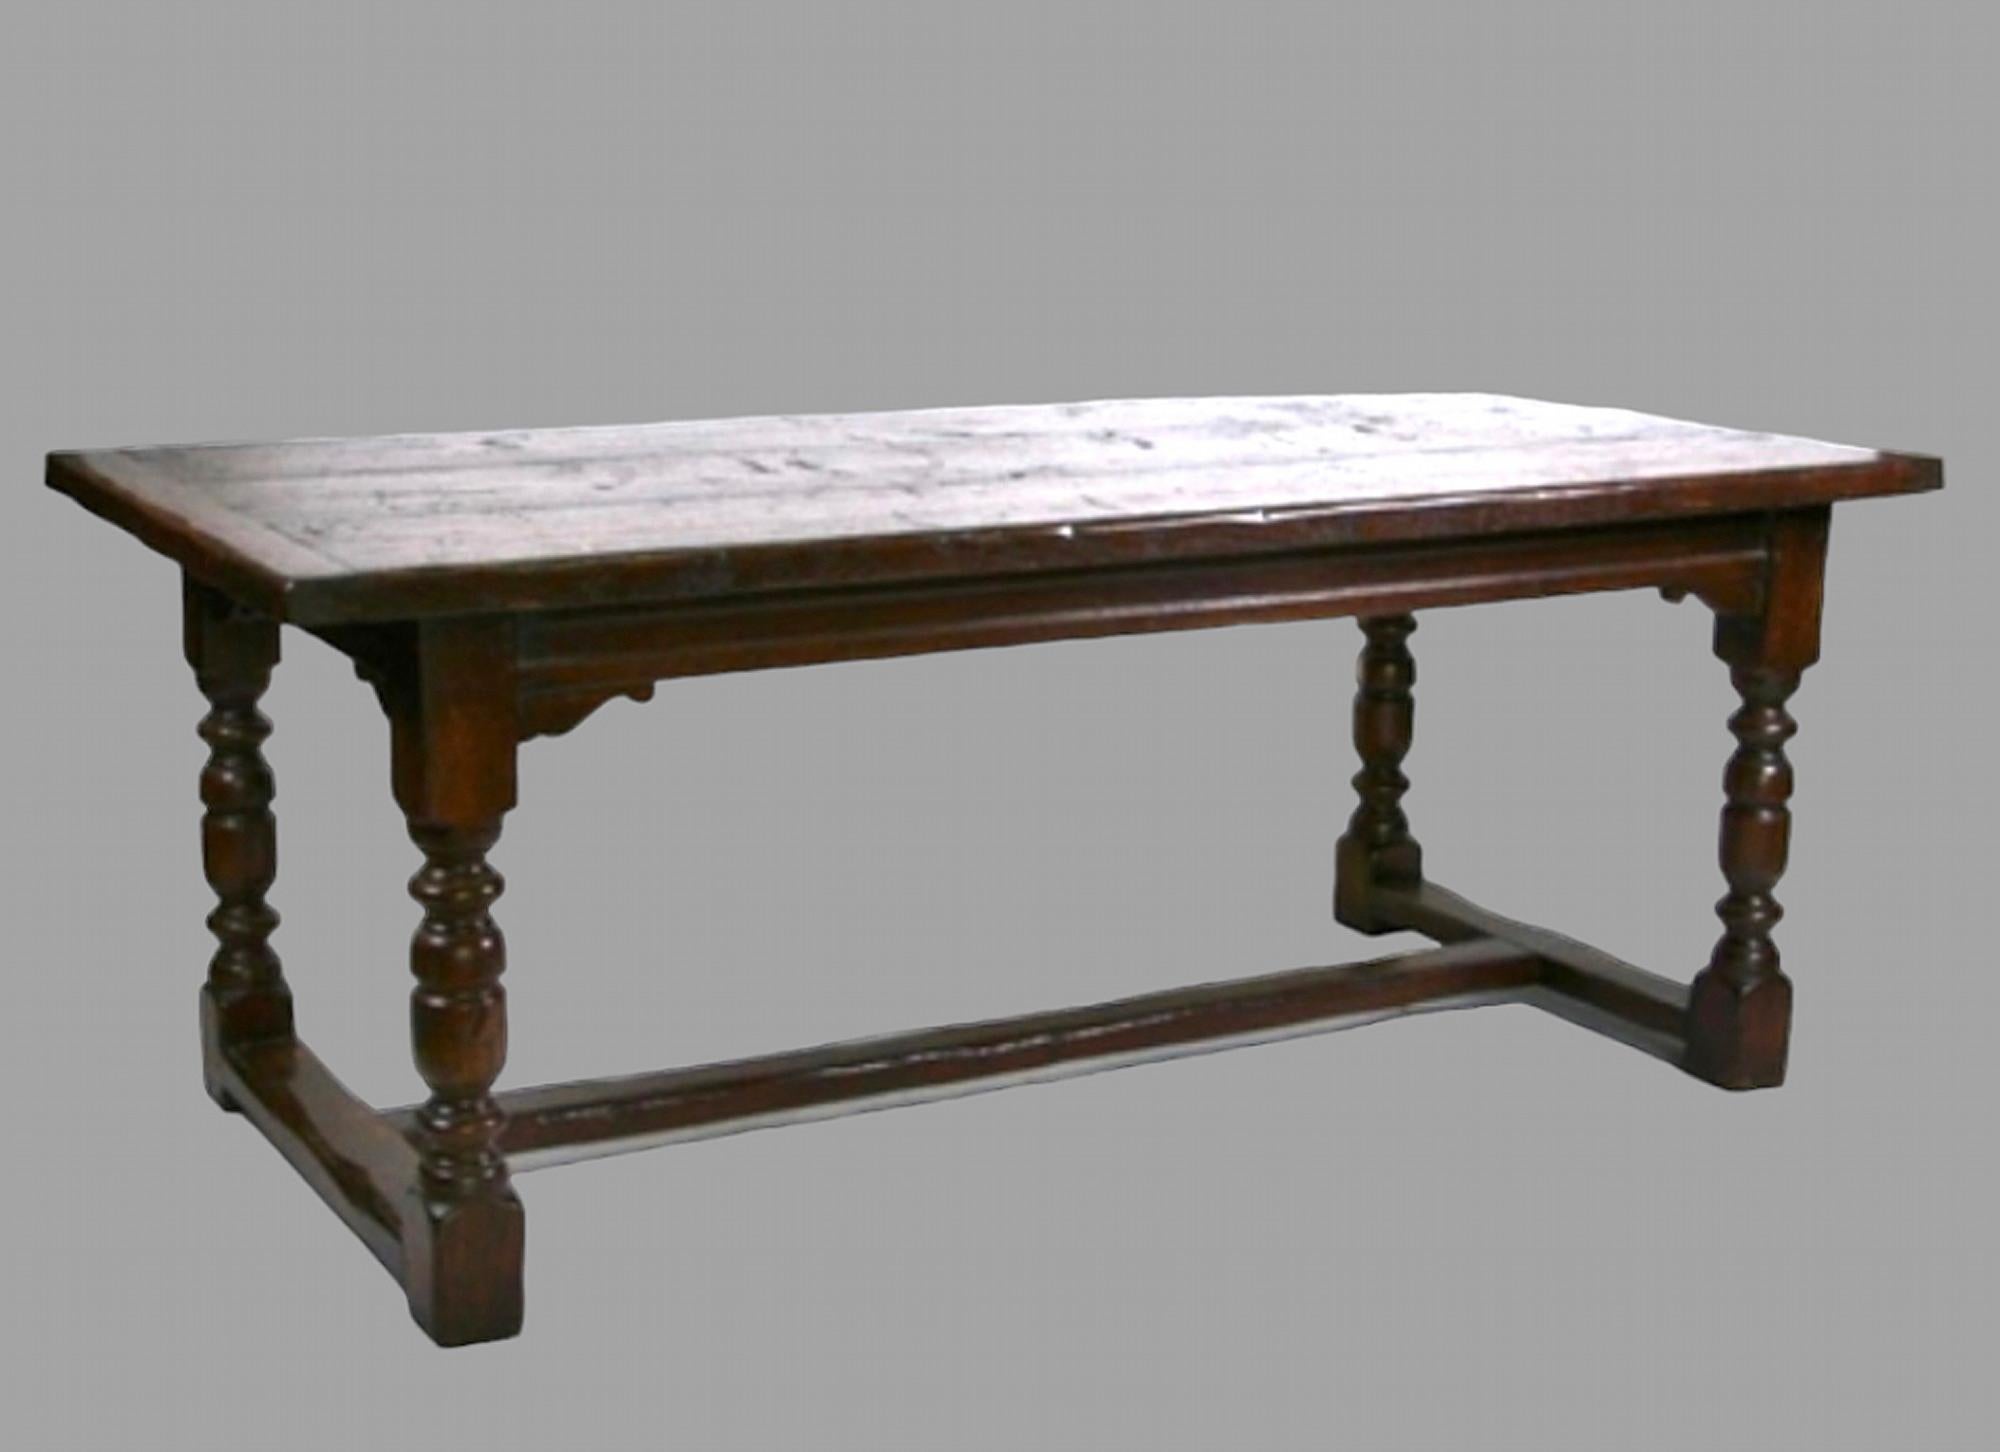 An Original solid oak English farmhouse country refectory dining table that seats 8people well.
A very good looking well made and versatile oak dining table, made in England.using traditional furniture methods, the table top is planked,
The table